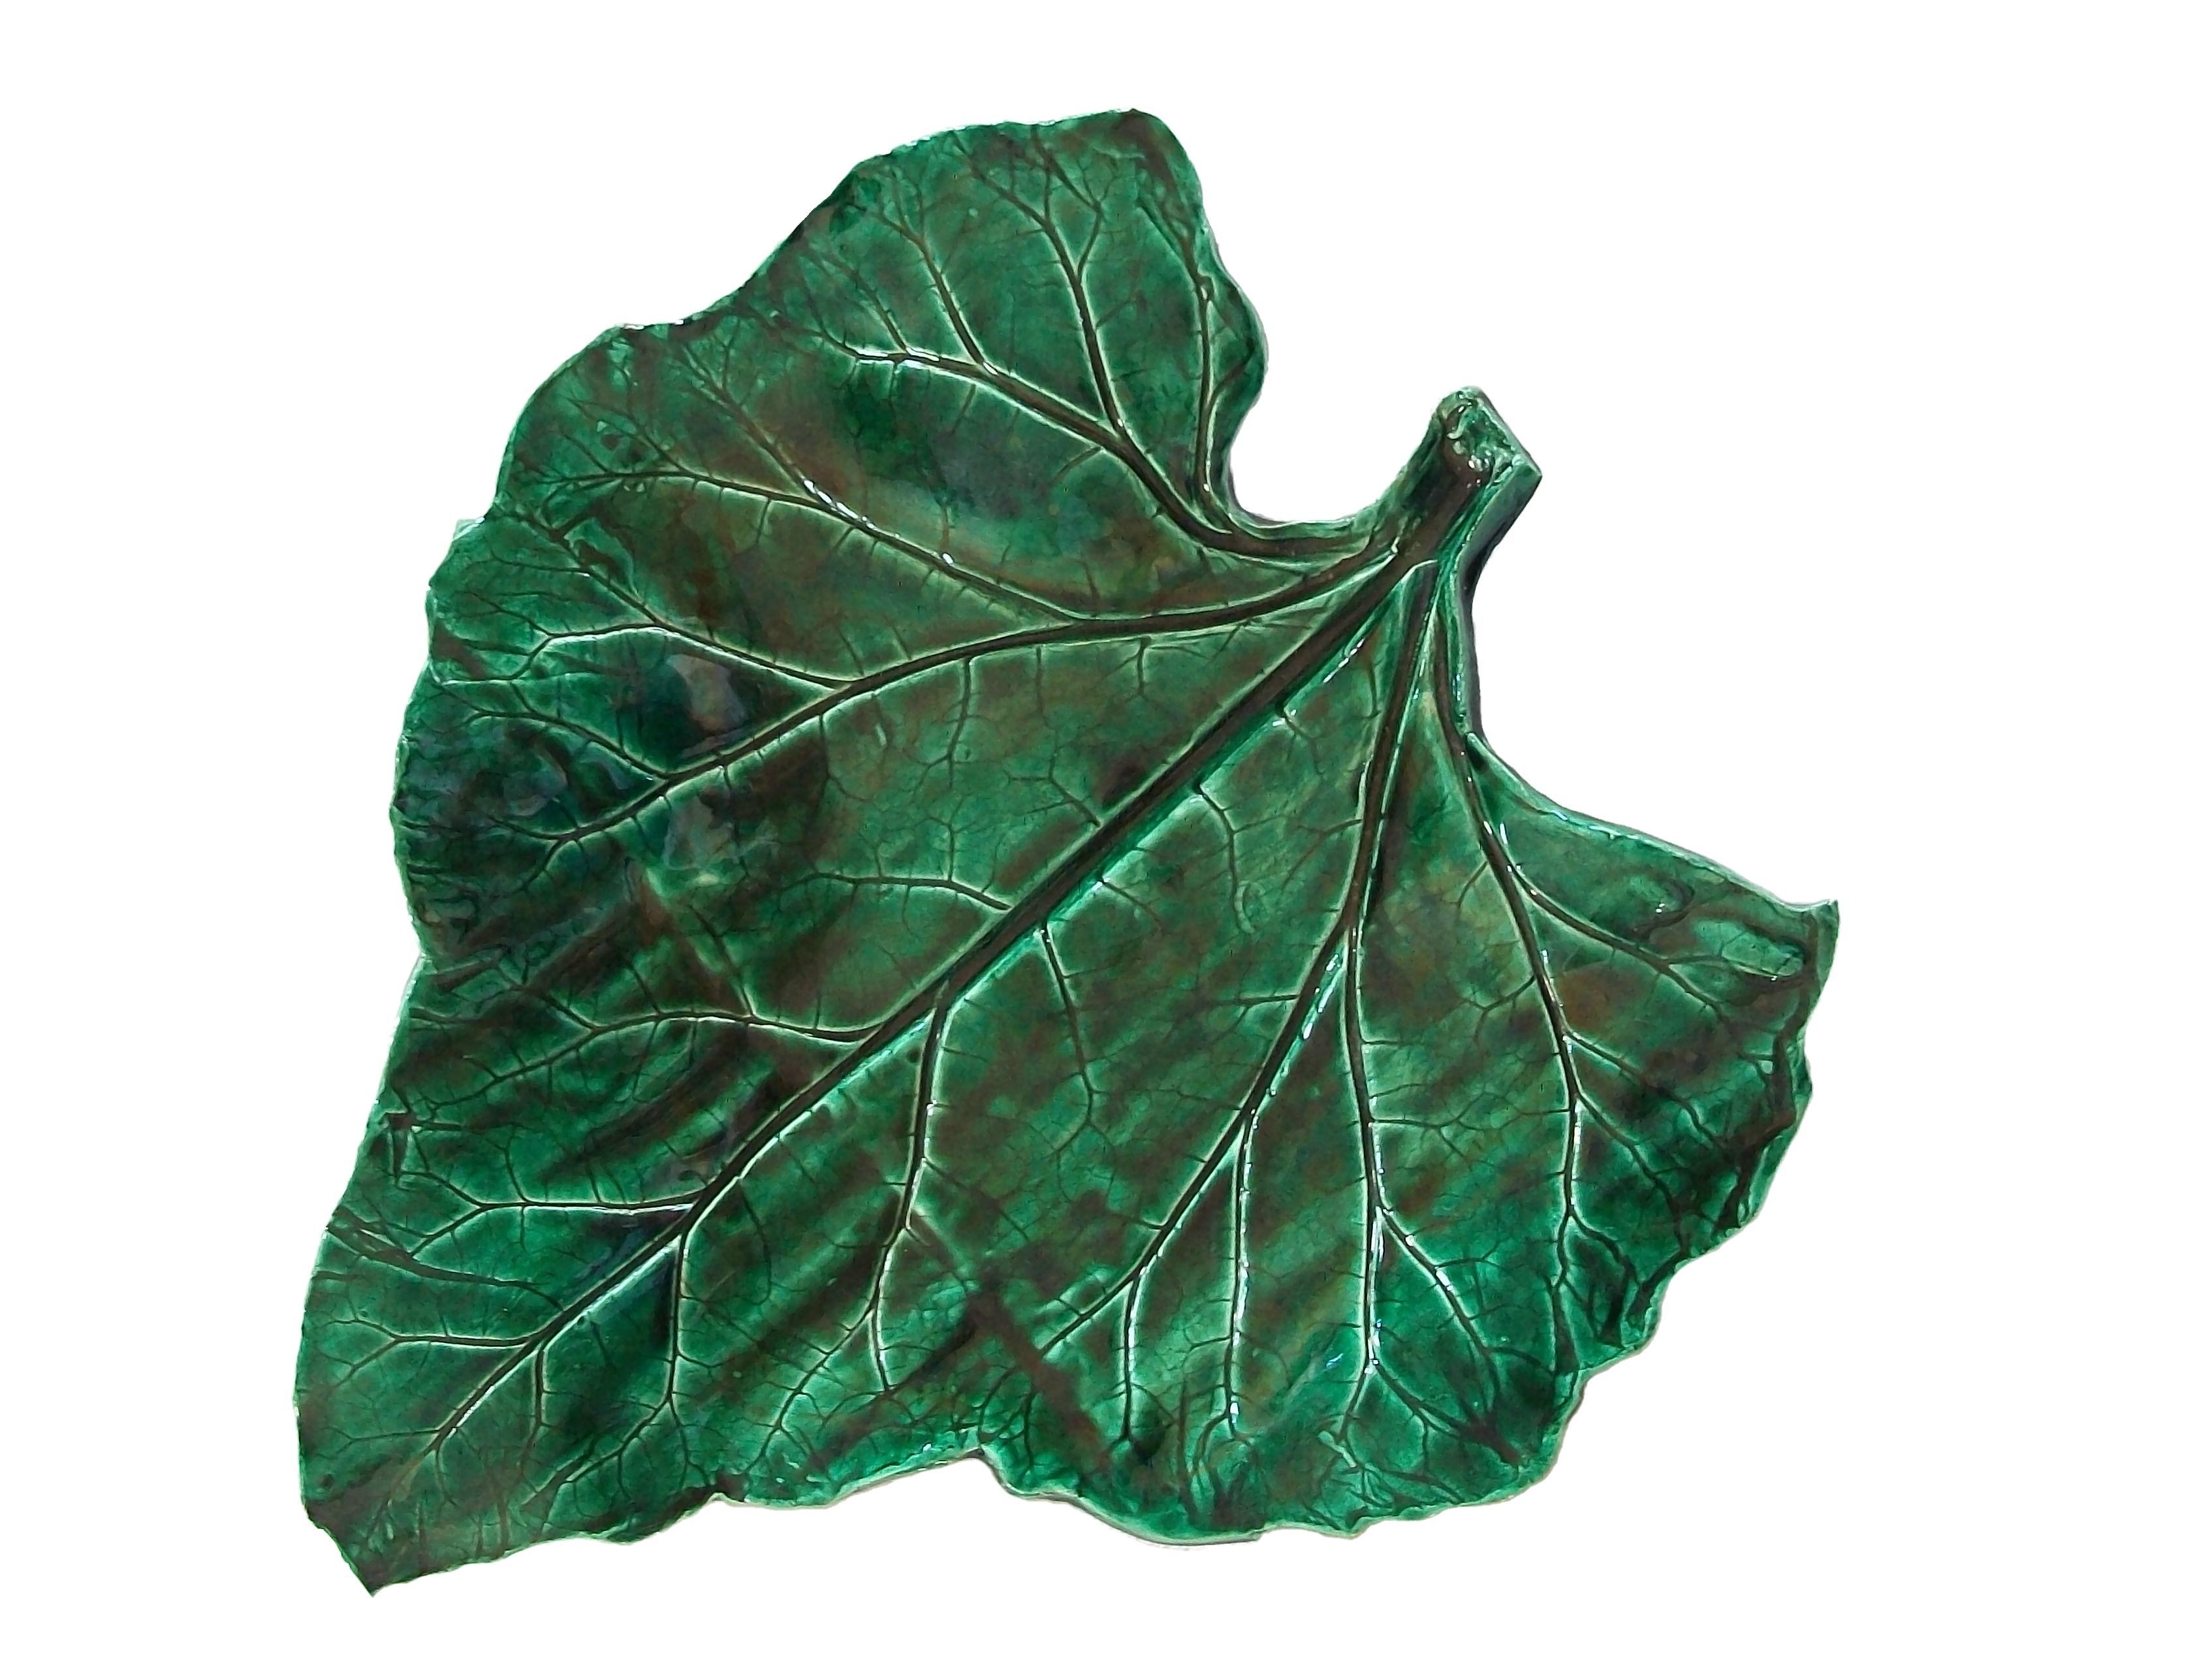 Large vintage studio pottery serving platter - realistically modelled/molded as a leaf - over-all dark green glaze with subtle iridescence - kiln/firing stilt marks to the base - unsigned - Canada (likely) - late 20th century.

Excellent vintage